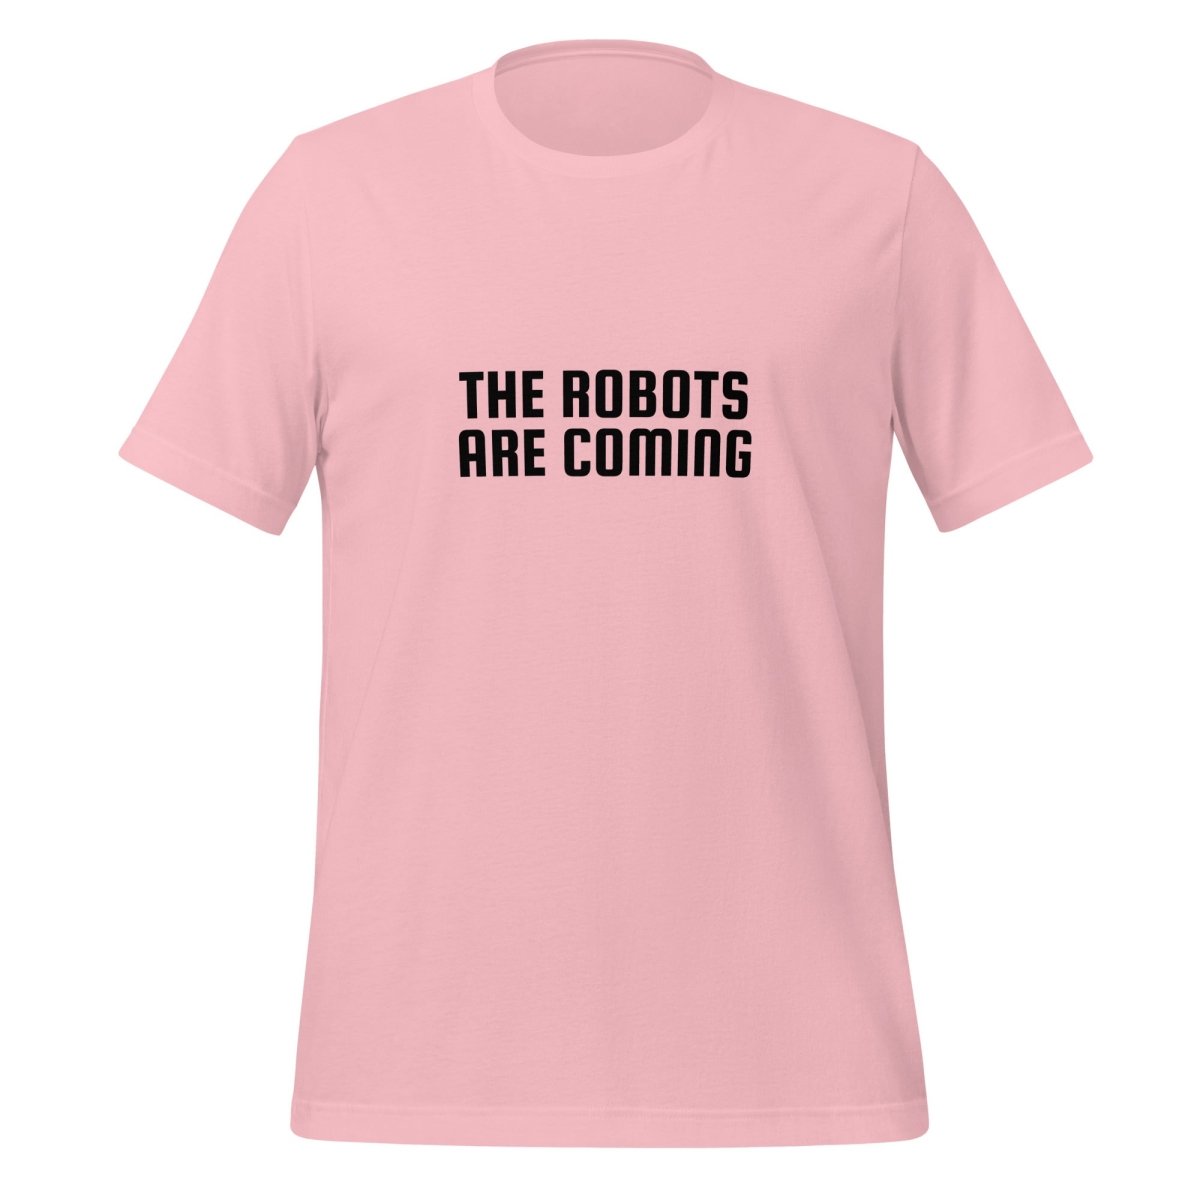 The Robots Are Coming in Black T - Shirt 2 (unisex) - Pink - AI Store